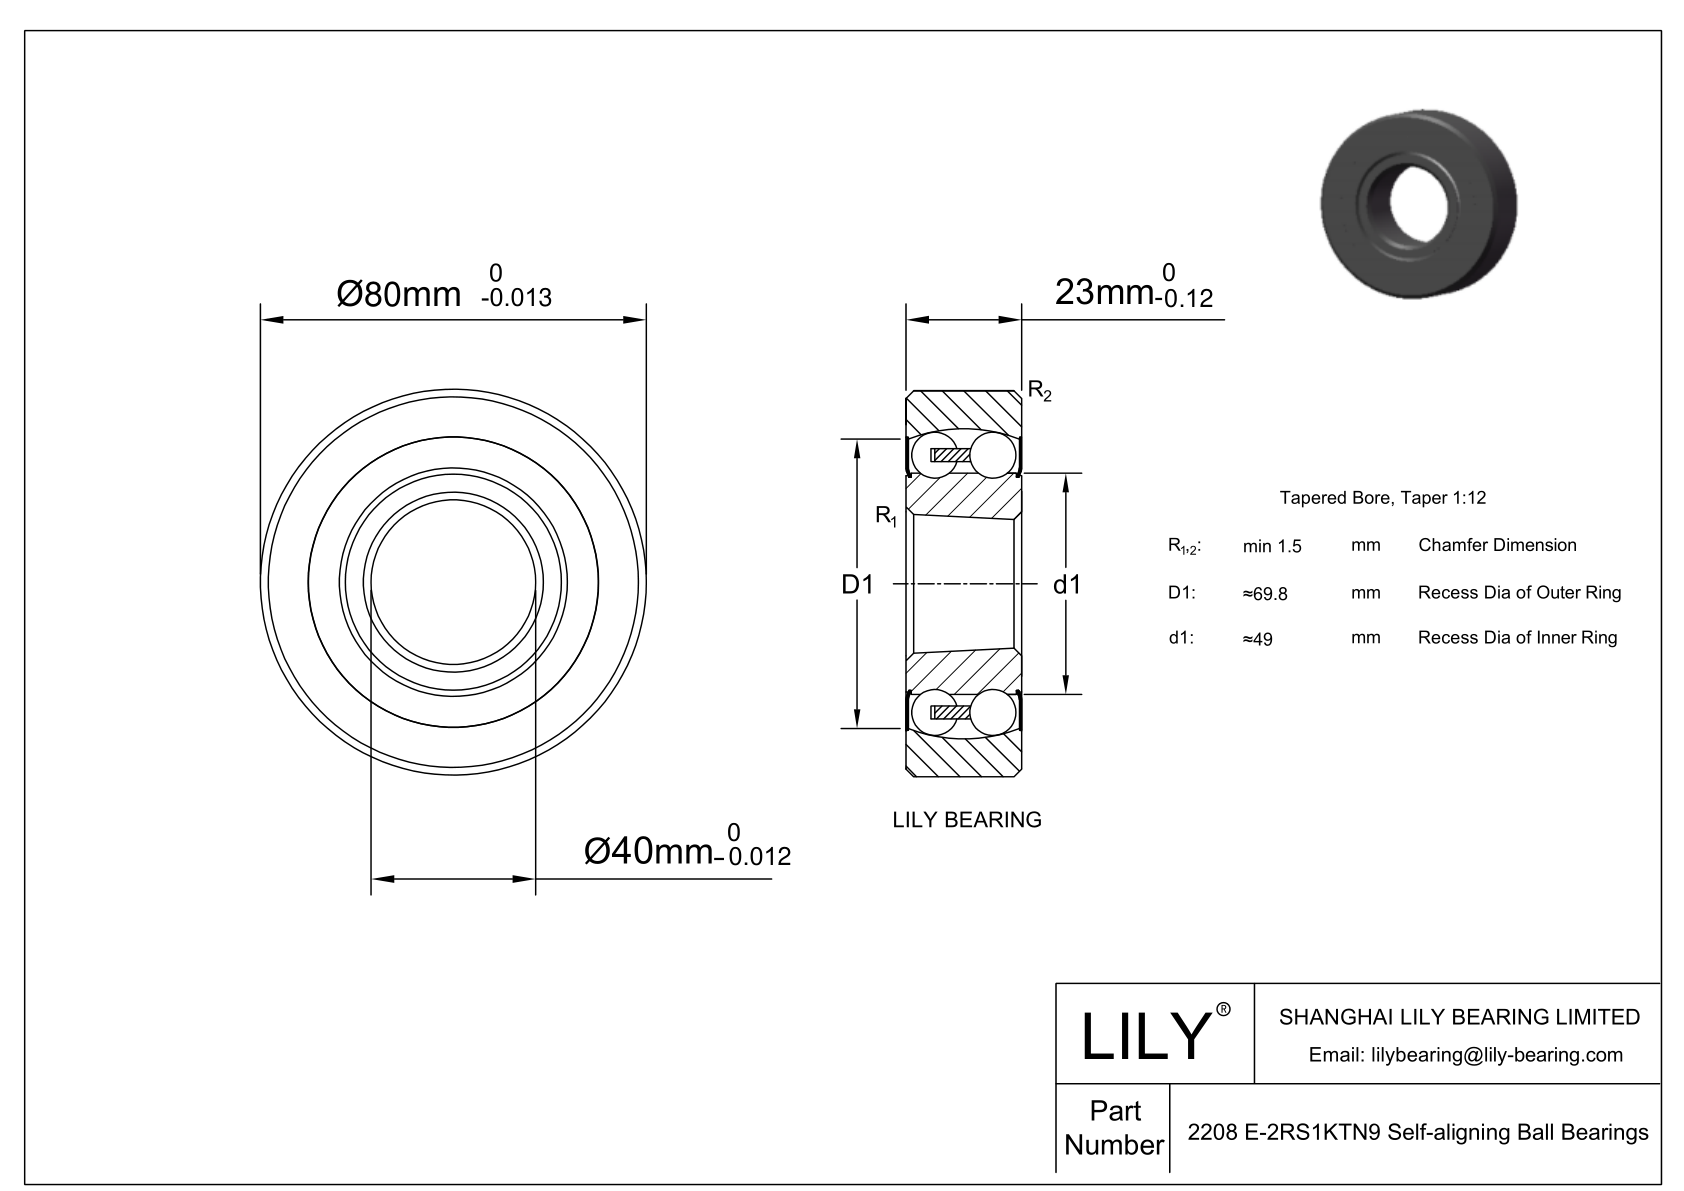 CE2208 E-SIPP Silicon Nitride Self Aligning Ball Bearings cad drawing